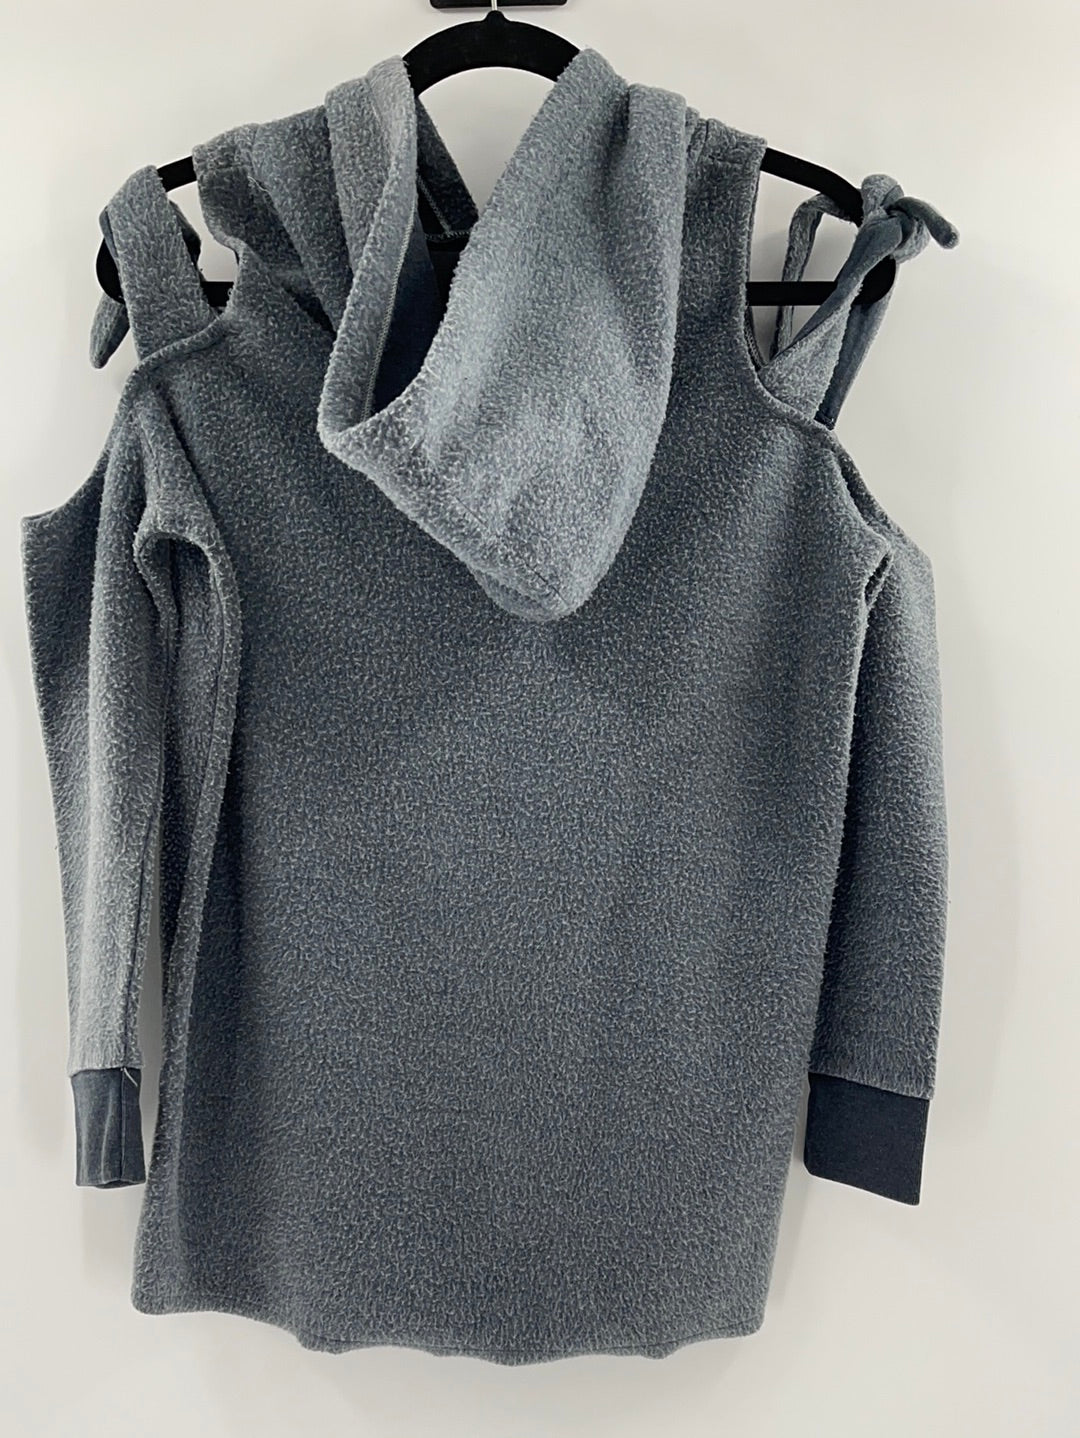 American Eagles Outfitters Gray Should Cut Out and Ties High Low Gray Sweater (Size Small)